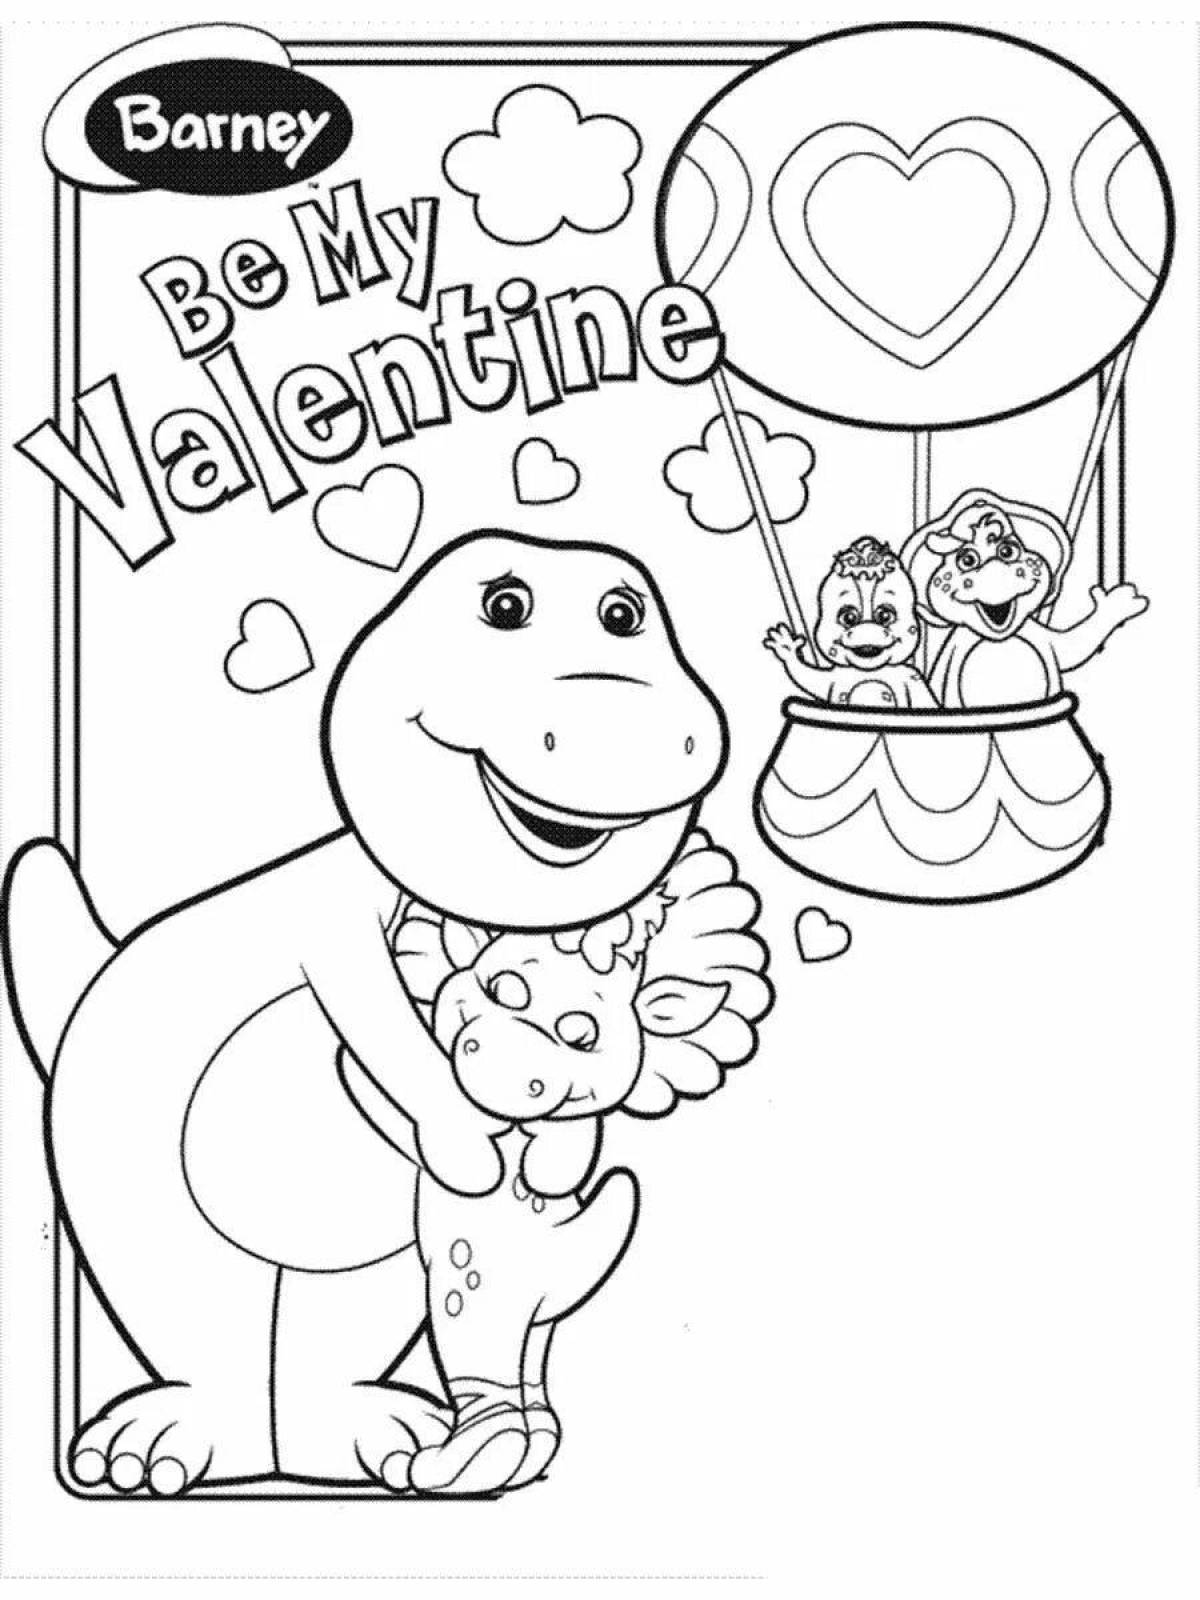 Barney's mischievous bear coloring page